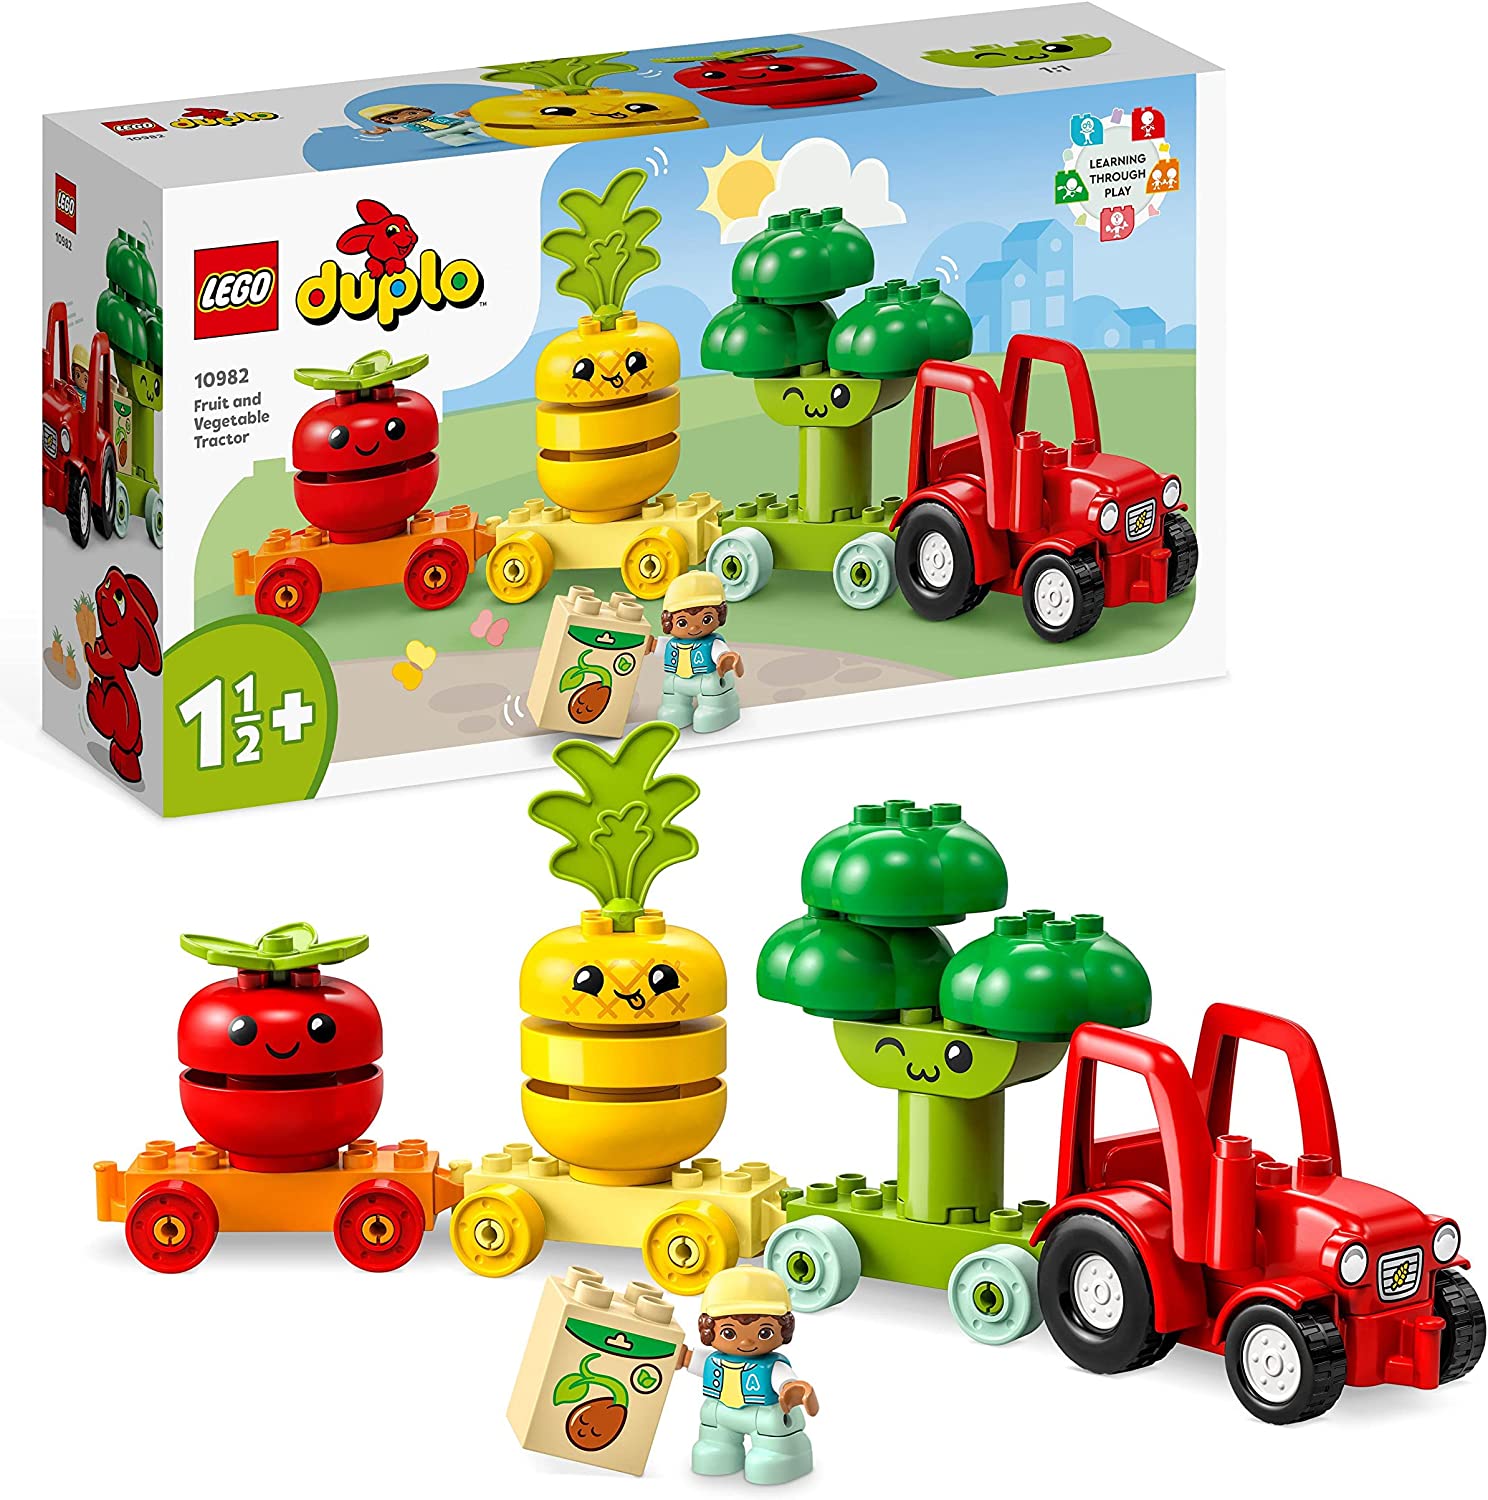 LEGO 10982 Duplo My First Fruit and vegetable tractor, Easter Gift Toy for Easter Crafts, Sorting and Stacking for Babies and Toddlers Aggers Aged 1.5 Years, Educational Toy for Easter 2023